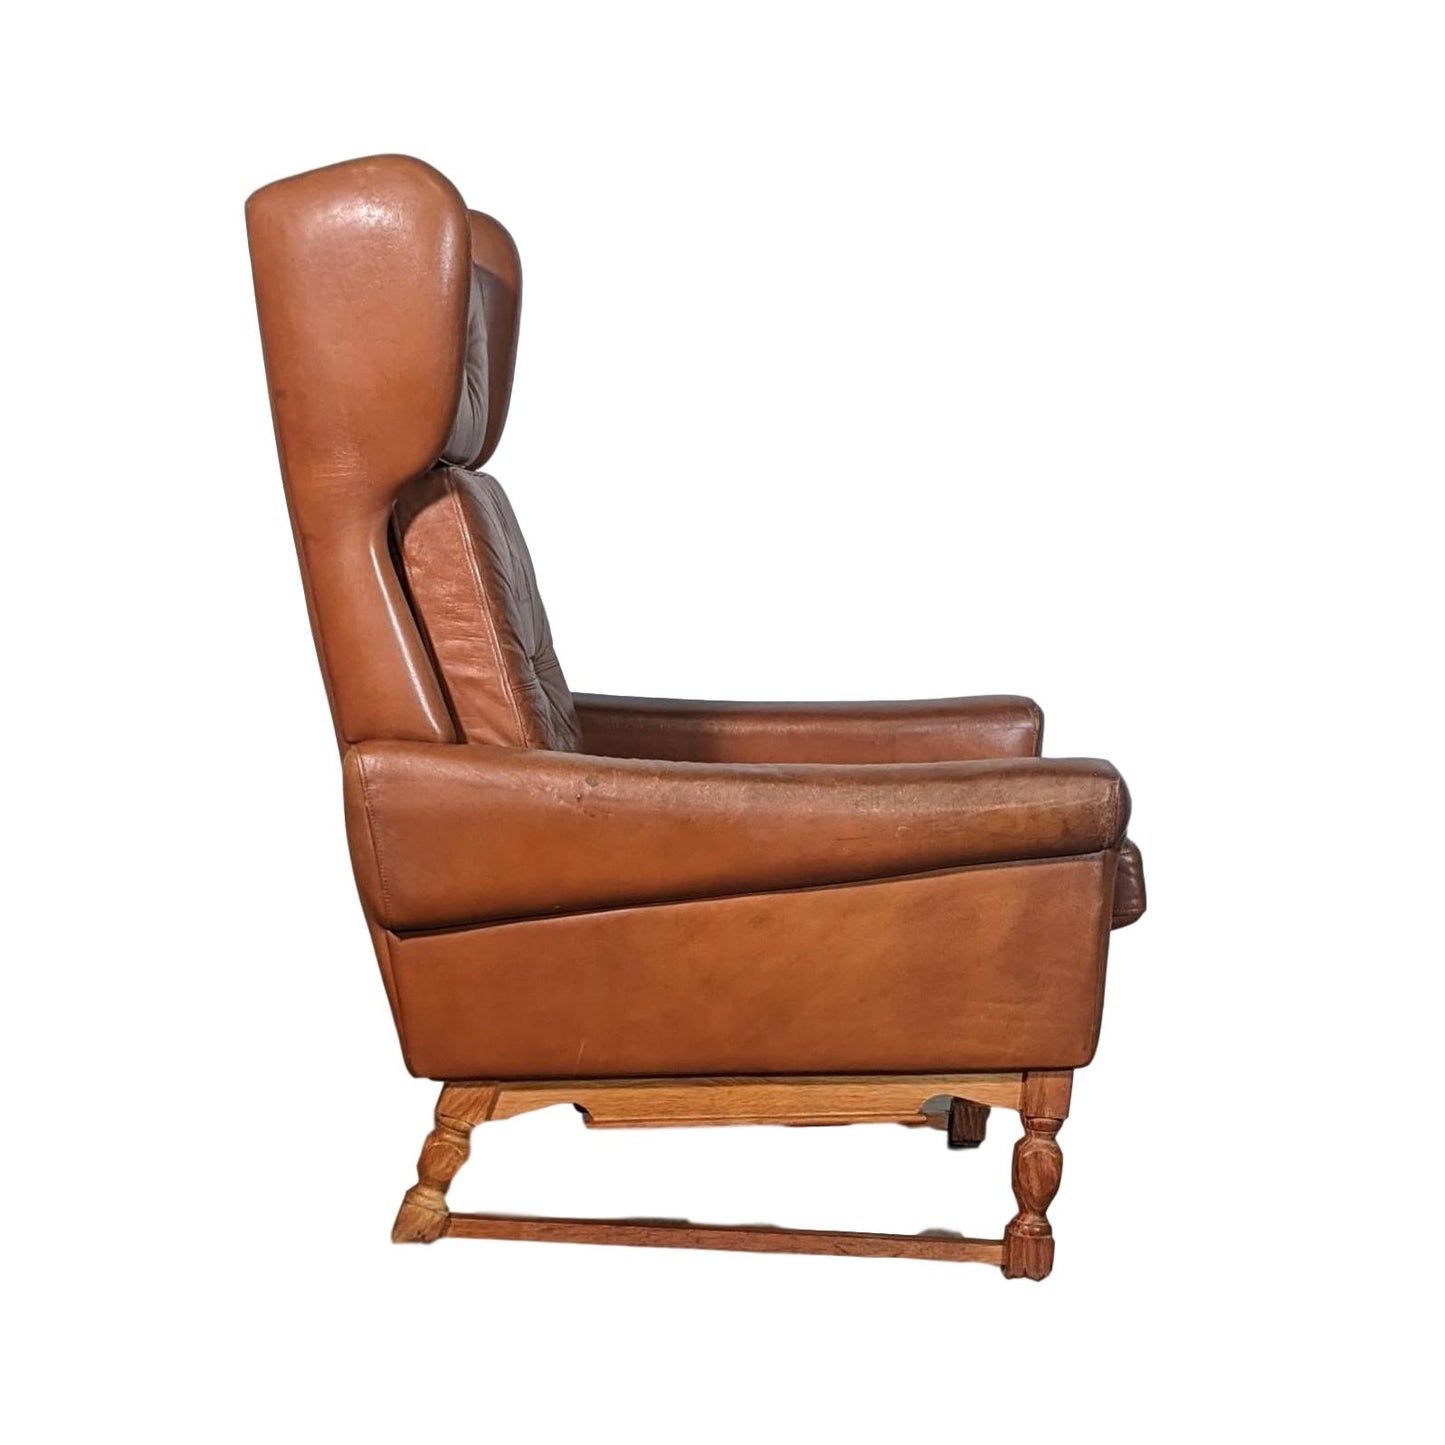 Mid Century Retro Danish Skippers Styled Tan Leather Lounge Chair